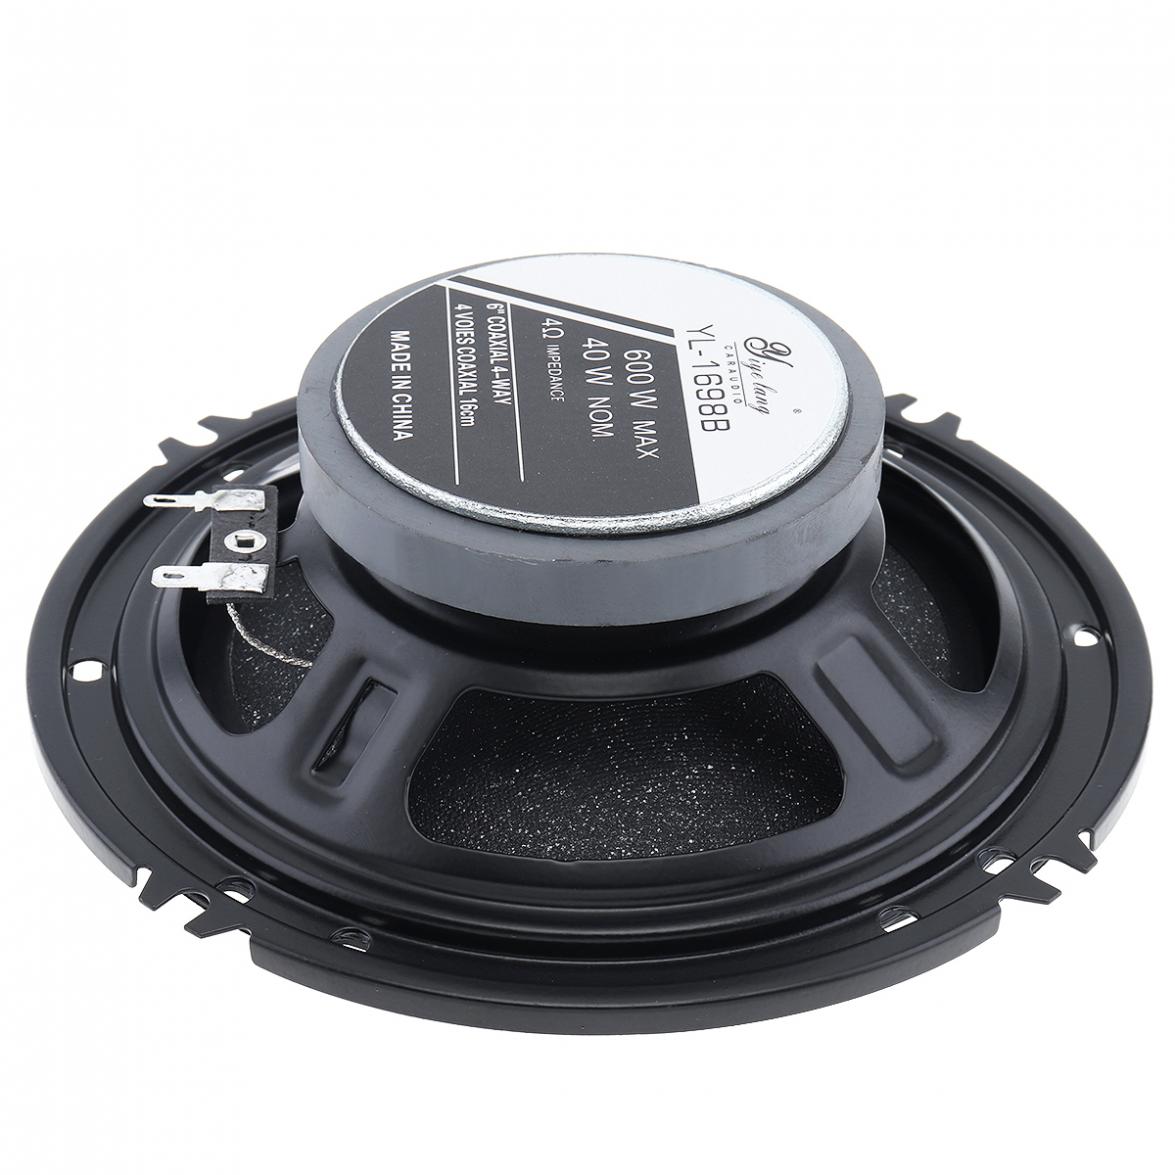 600 W Coaxial Car Speakers Ships From : China|Russian Federation 